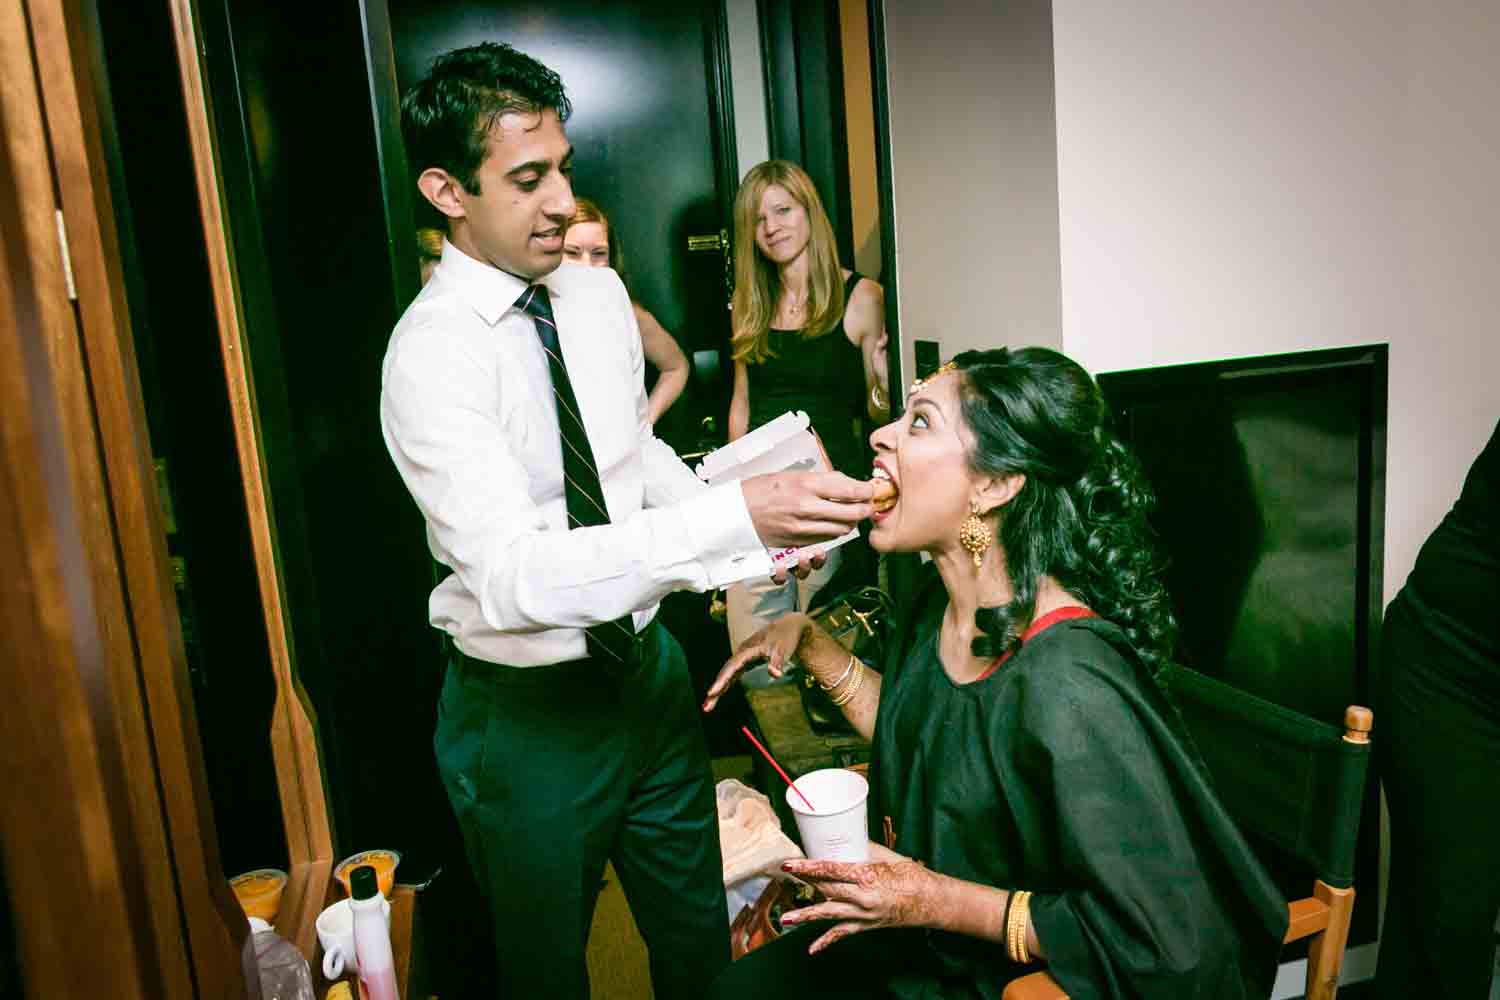 Brother feeding bride while she is getting ready